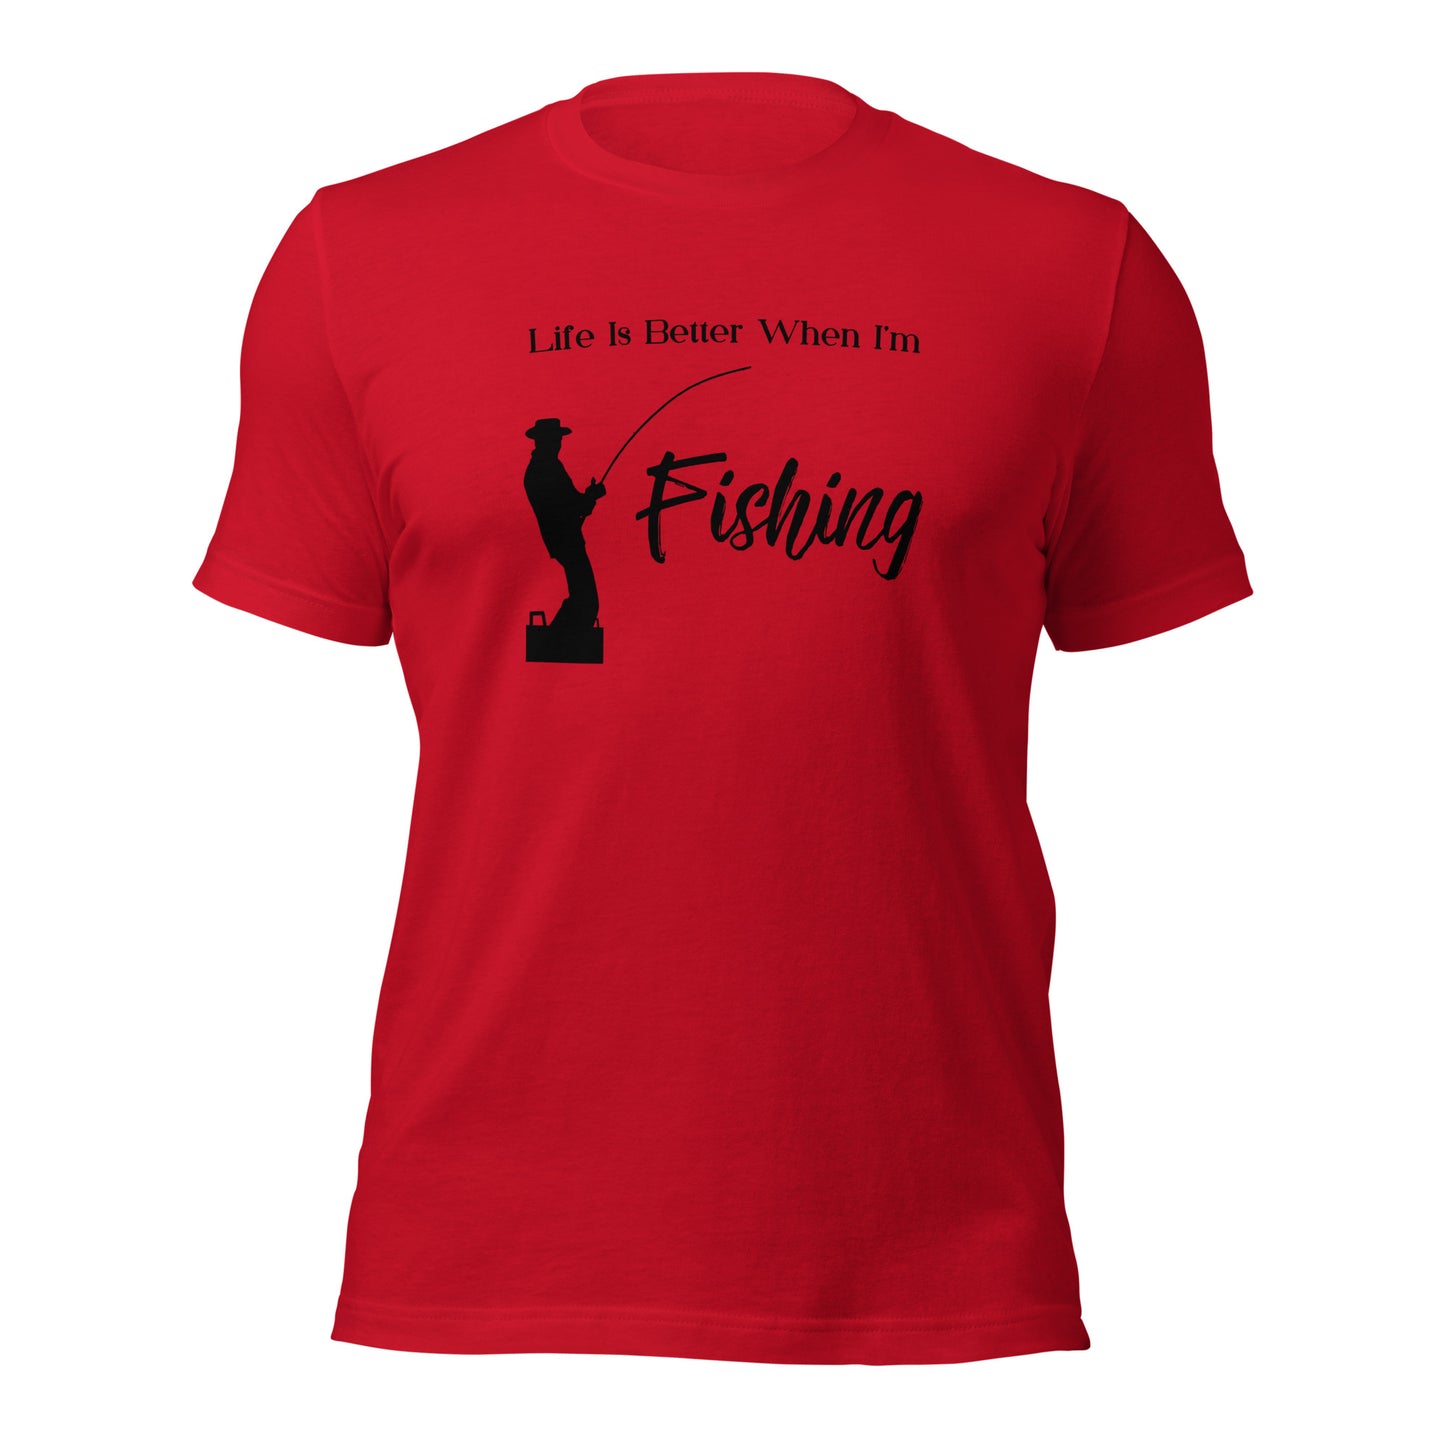 "Life Is Better When I'm Fishing" T-Shirt - Weave Got Gifts - Unique Gifts You Won’t Find Anywhere Else!